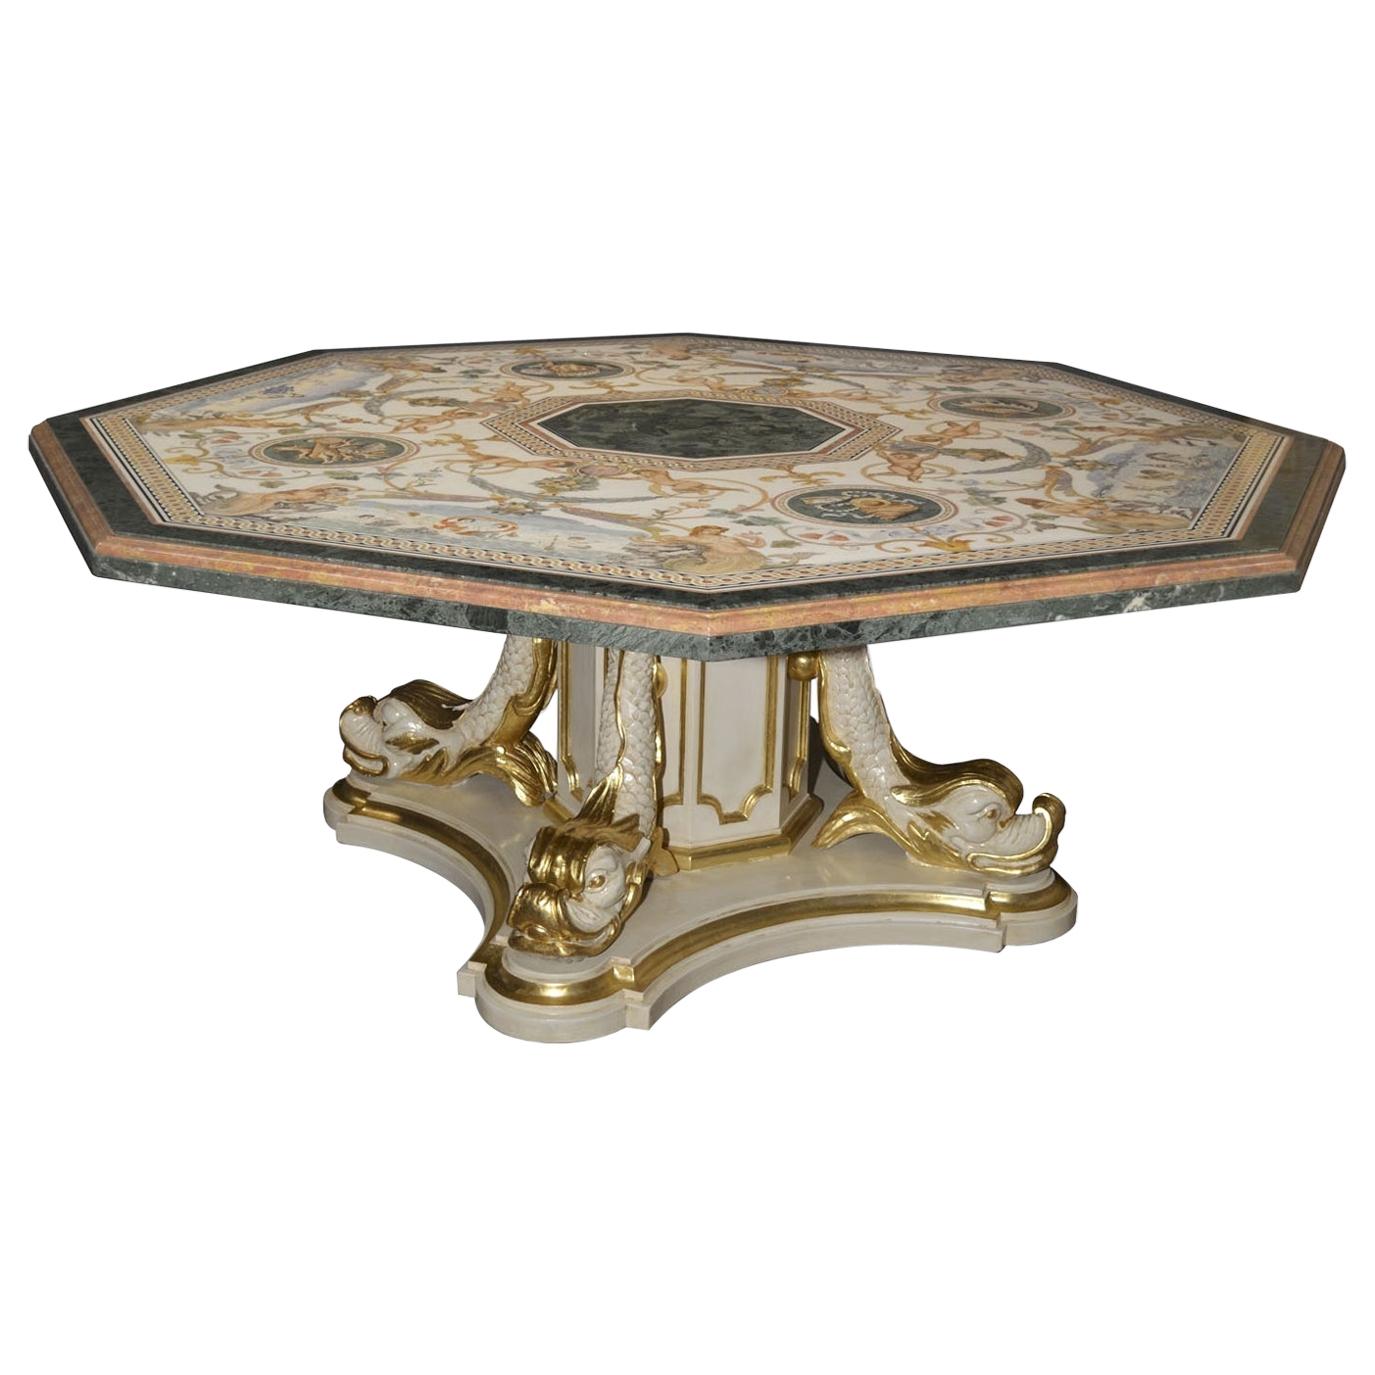 Big marble table inlaid top carved wood base handmade in Italy by Cupioli 